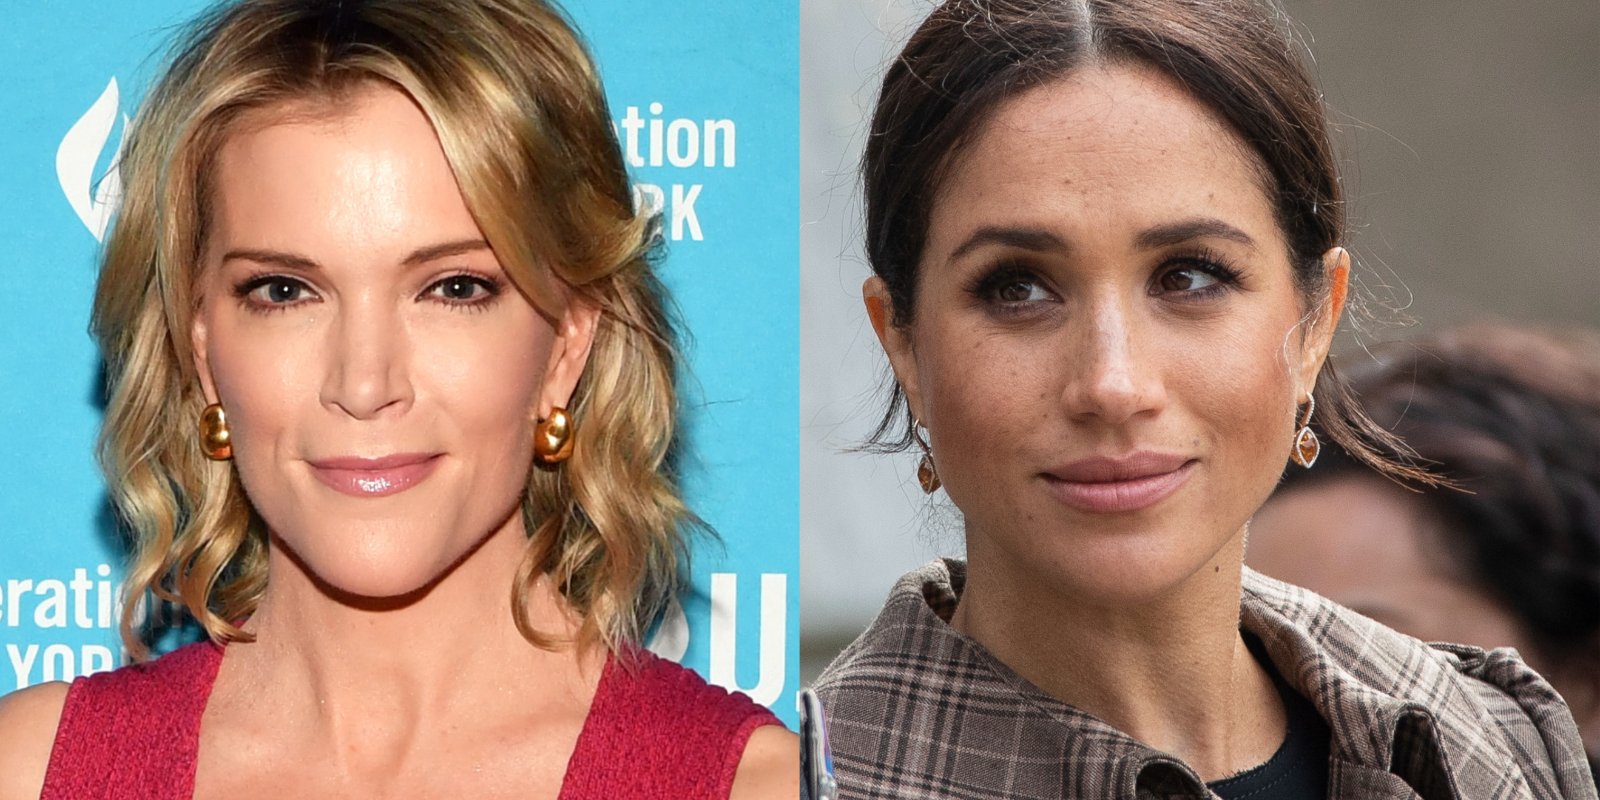 Megyn Kelly and Meghan Markle in side by side photographs.